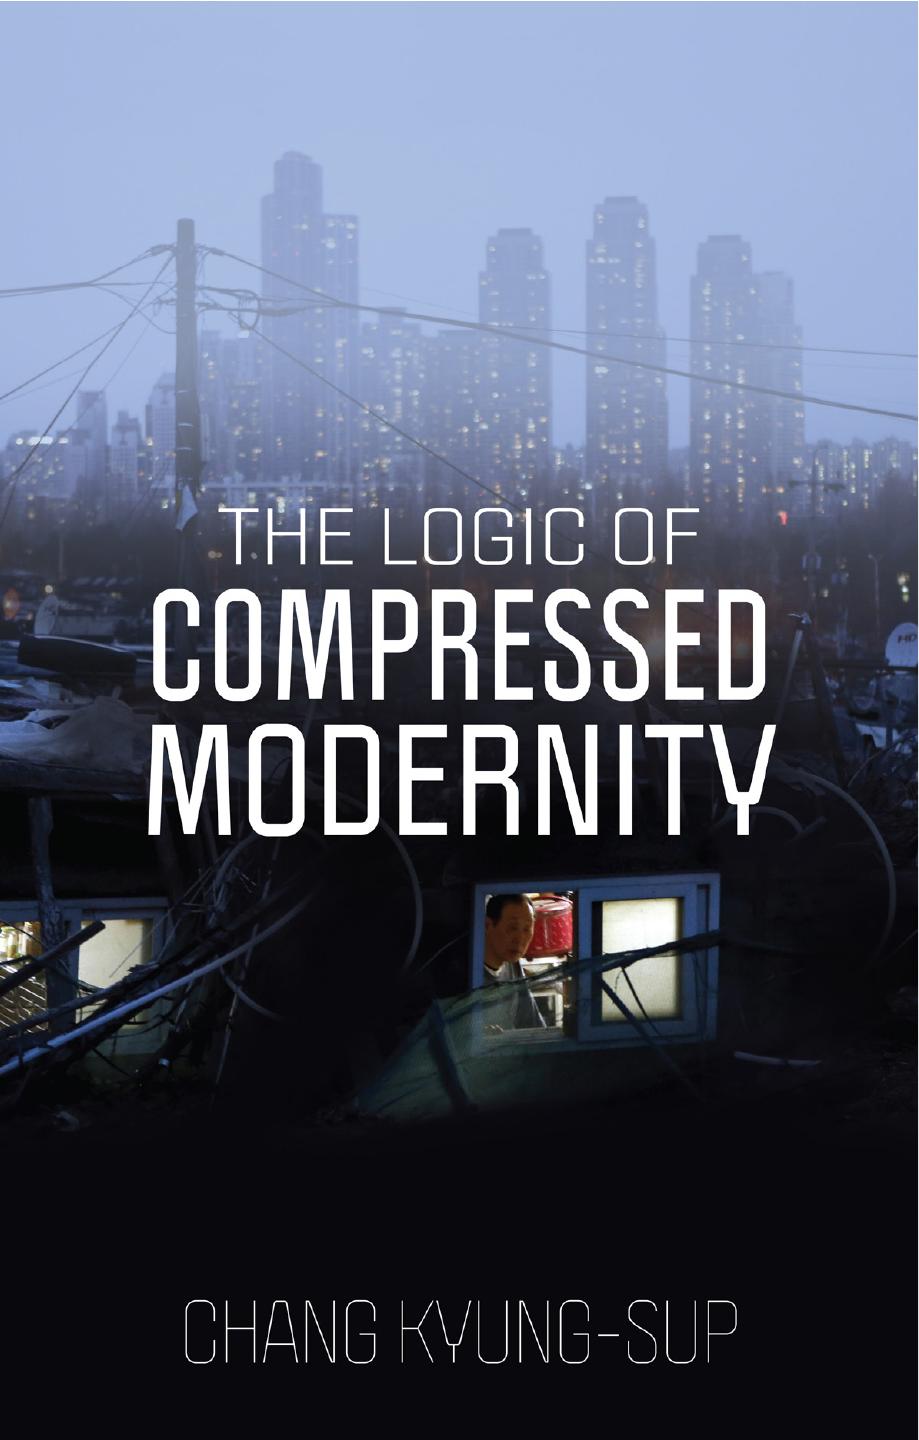 The Logic of Compressed Modernity by Chang Kyung-Sup